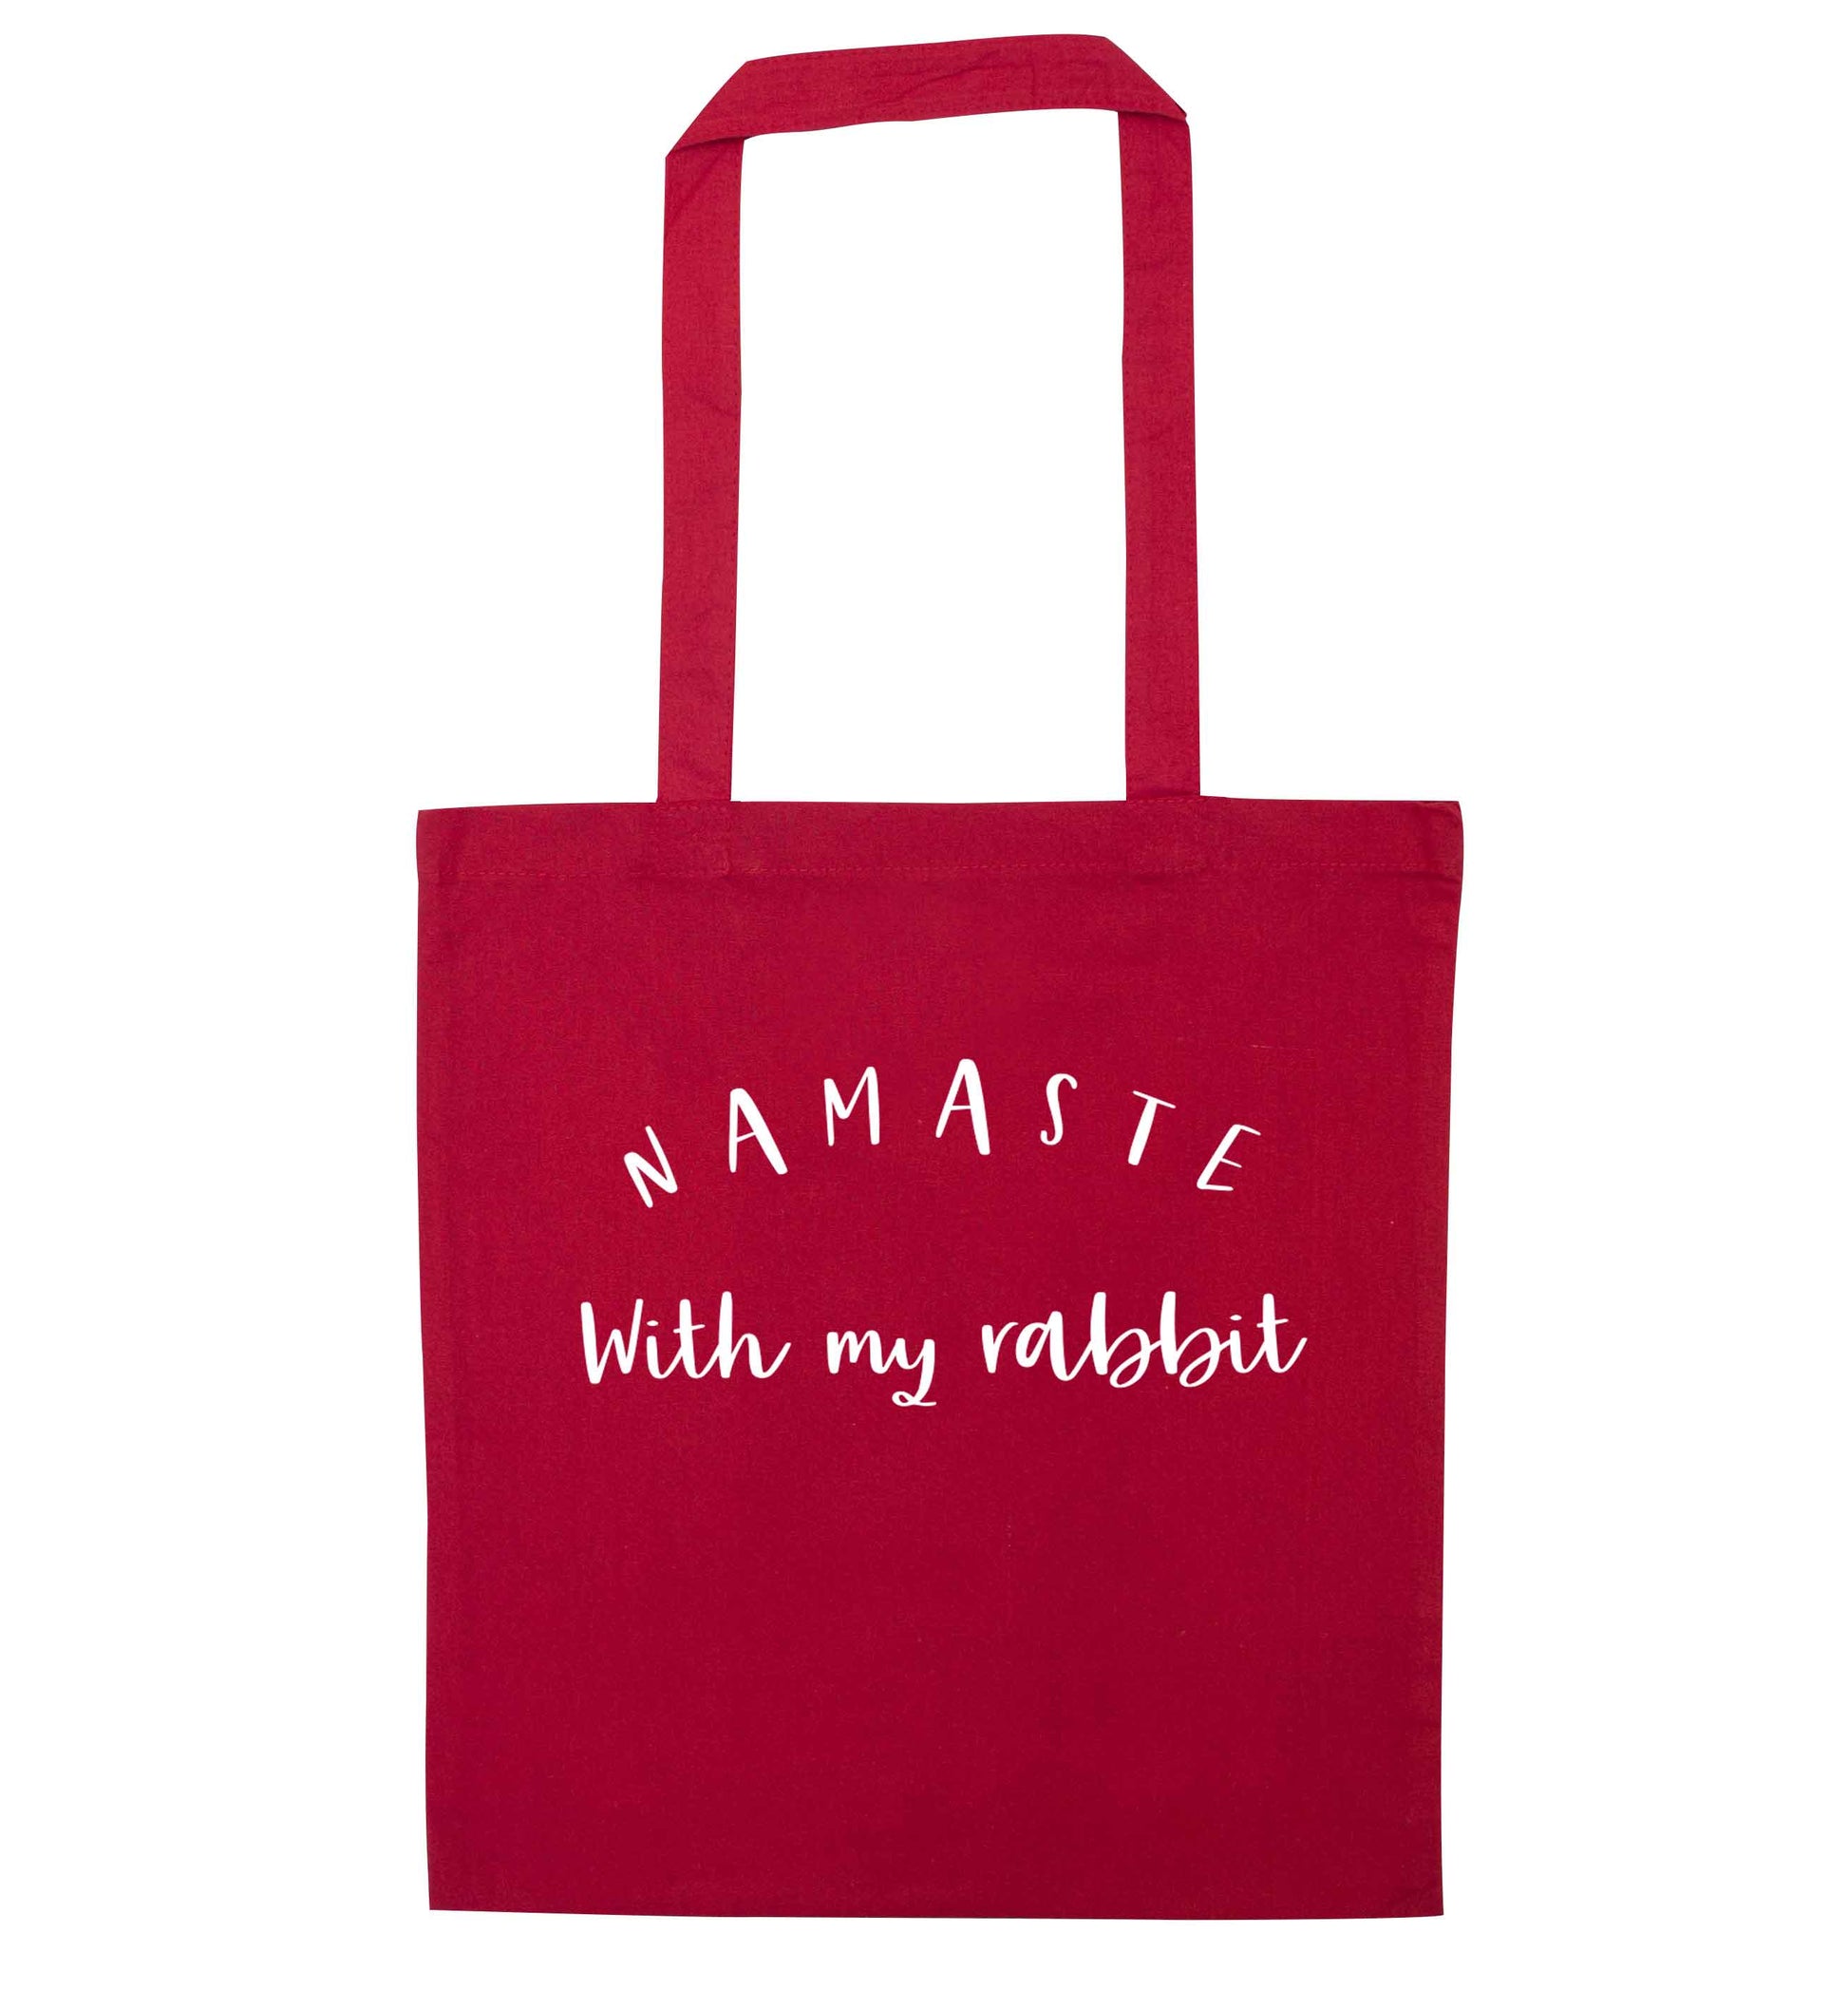 Namaste with my rabbit red tote bag